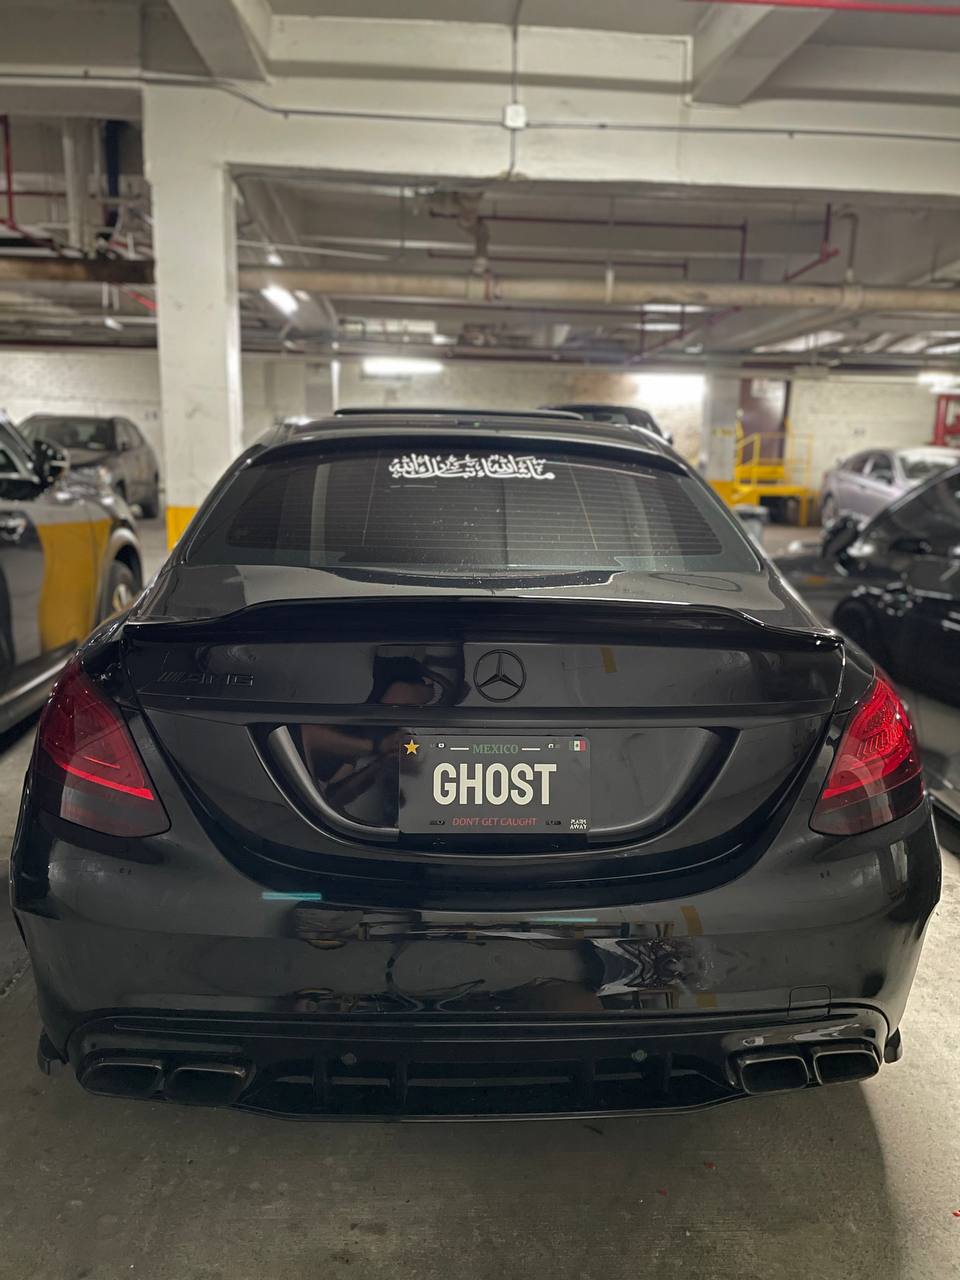 "Ghost" License Plates